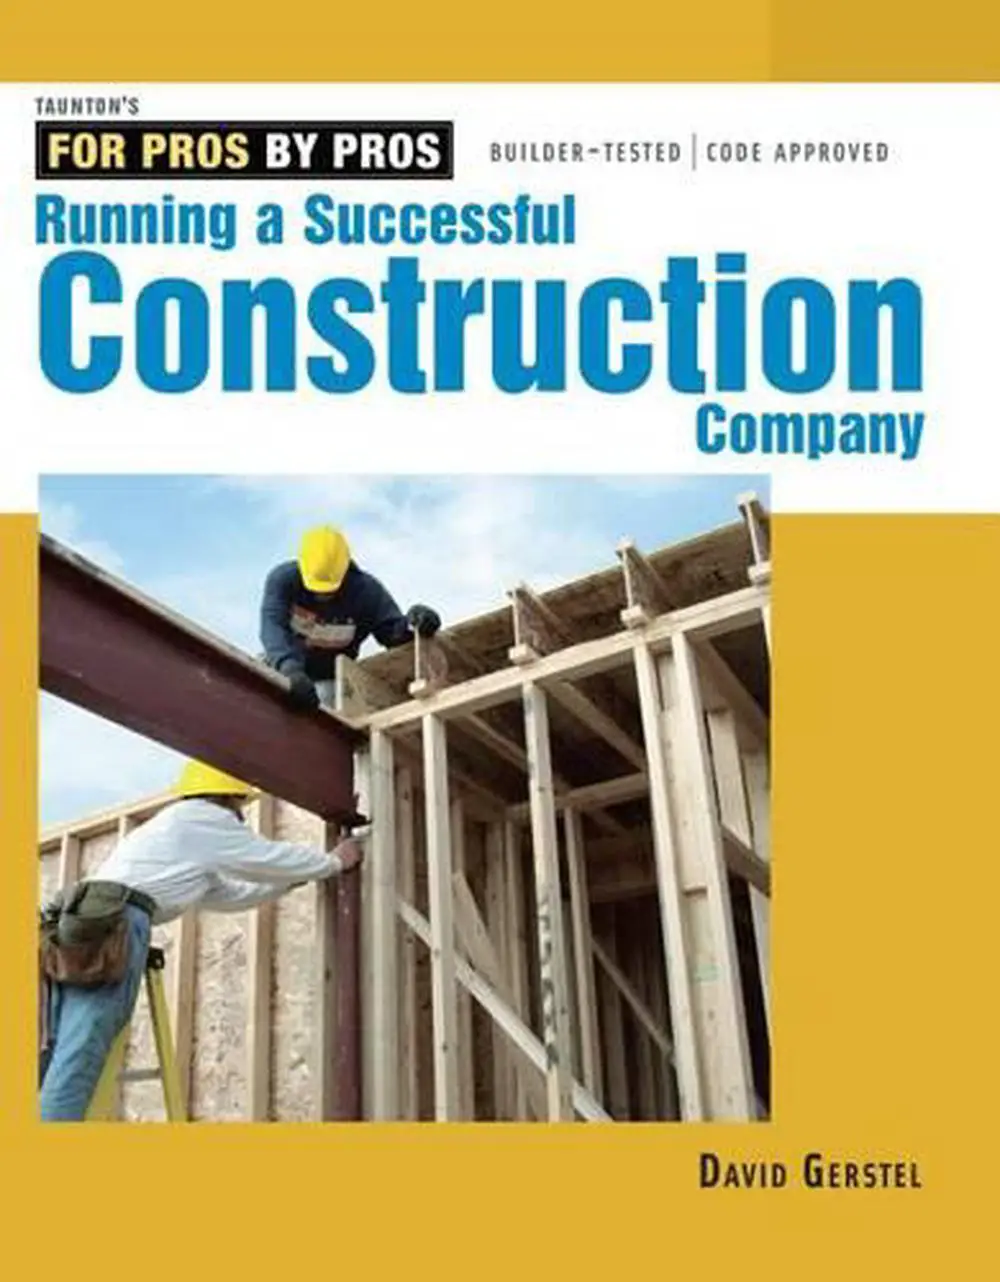 Running a Successful Construction Company by David Gerstel ...